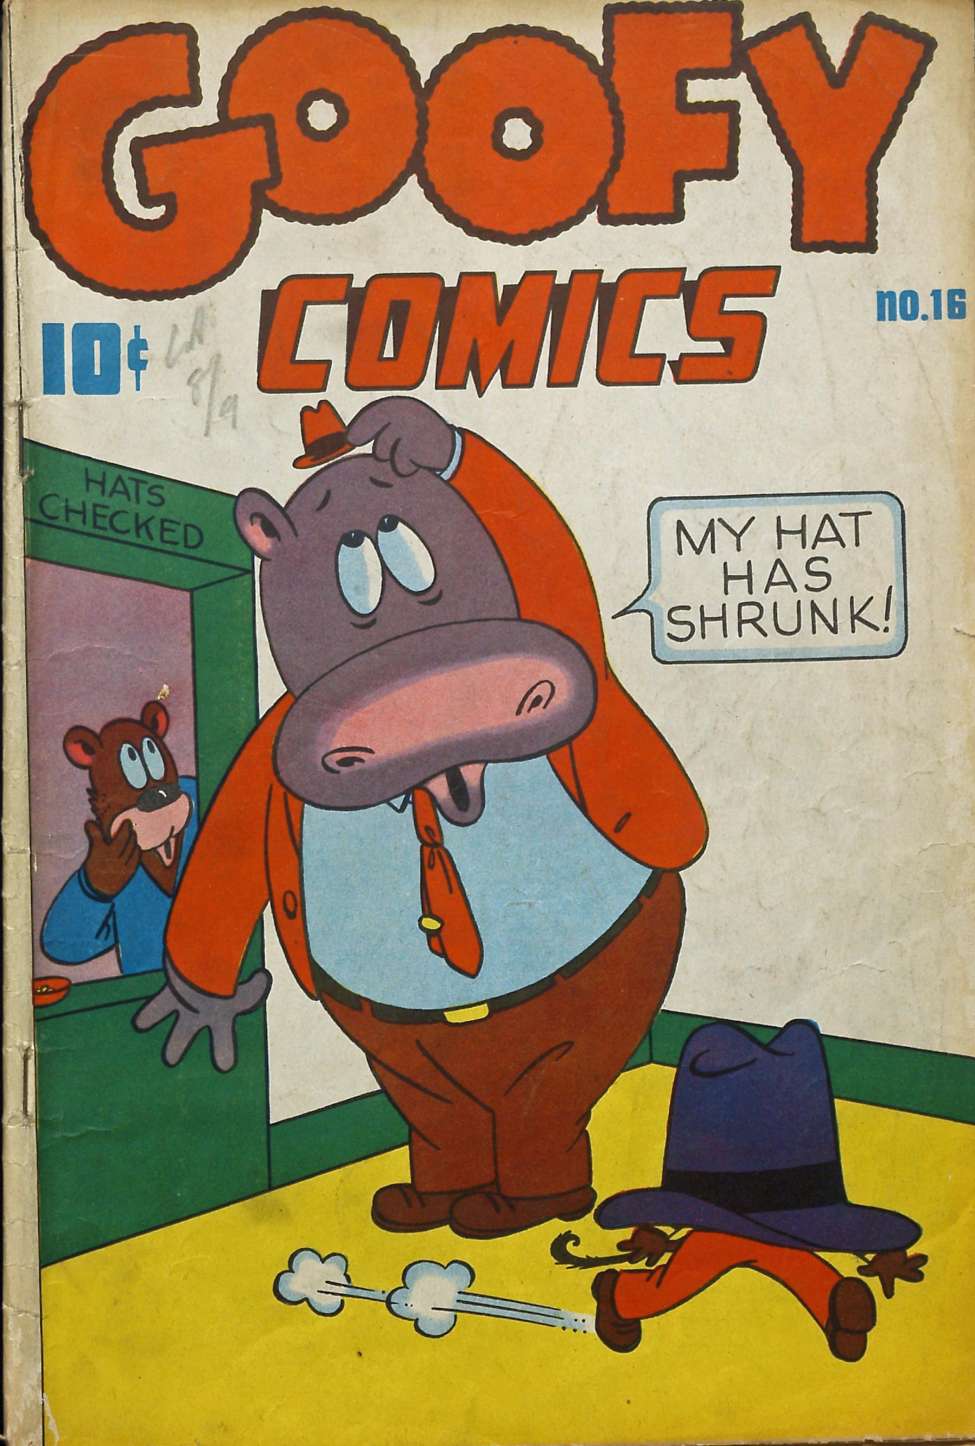 Book Cover For Goofy Comics 16 - Version 1